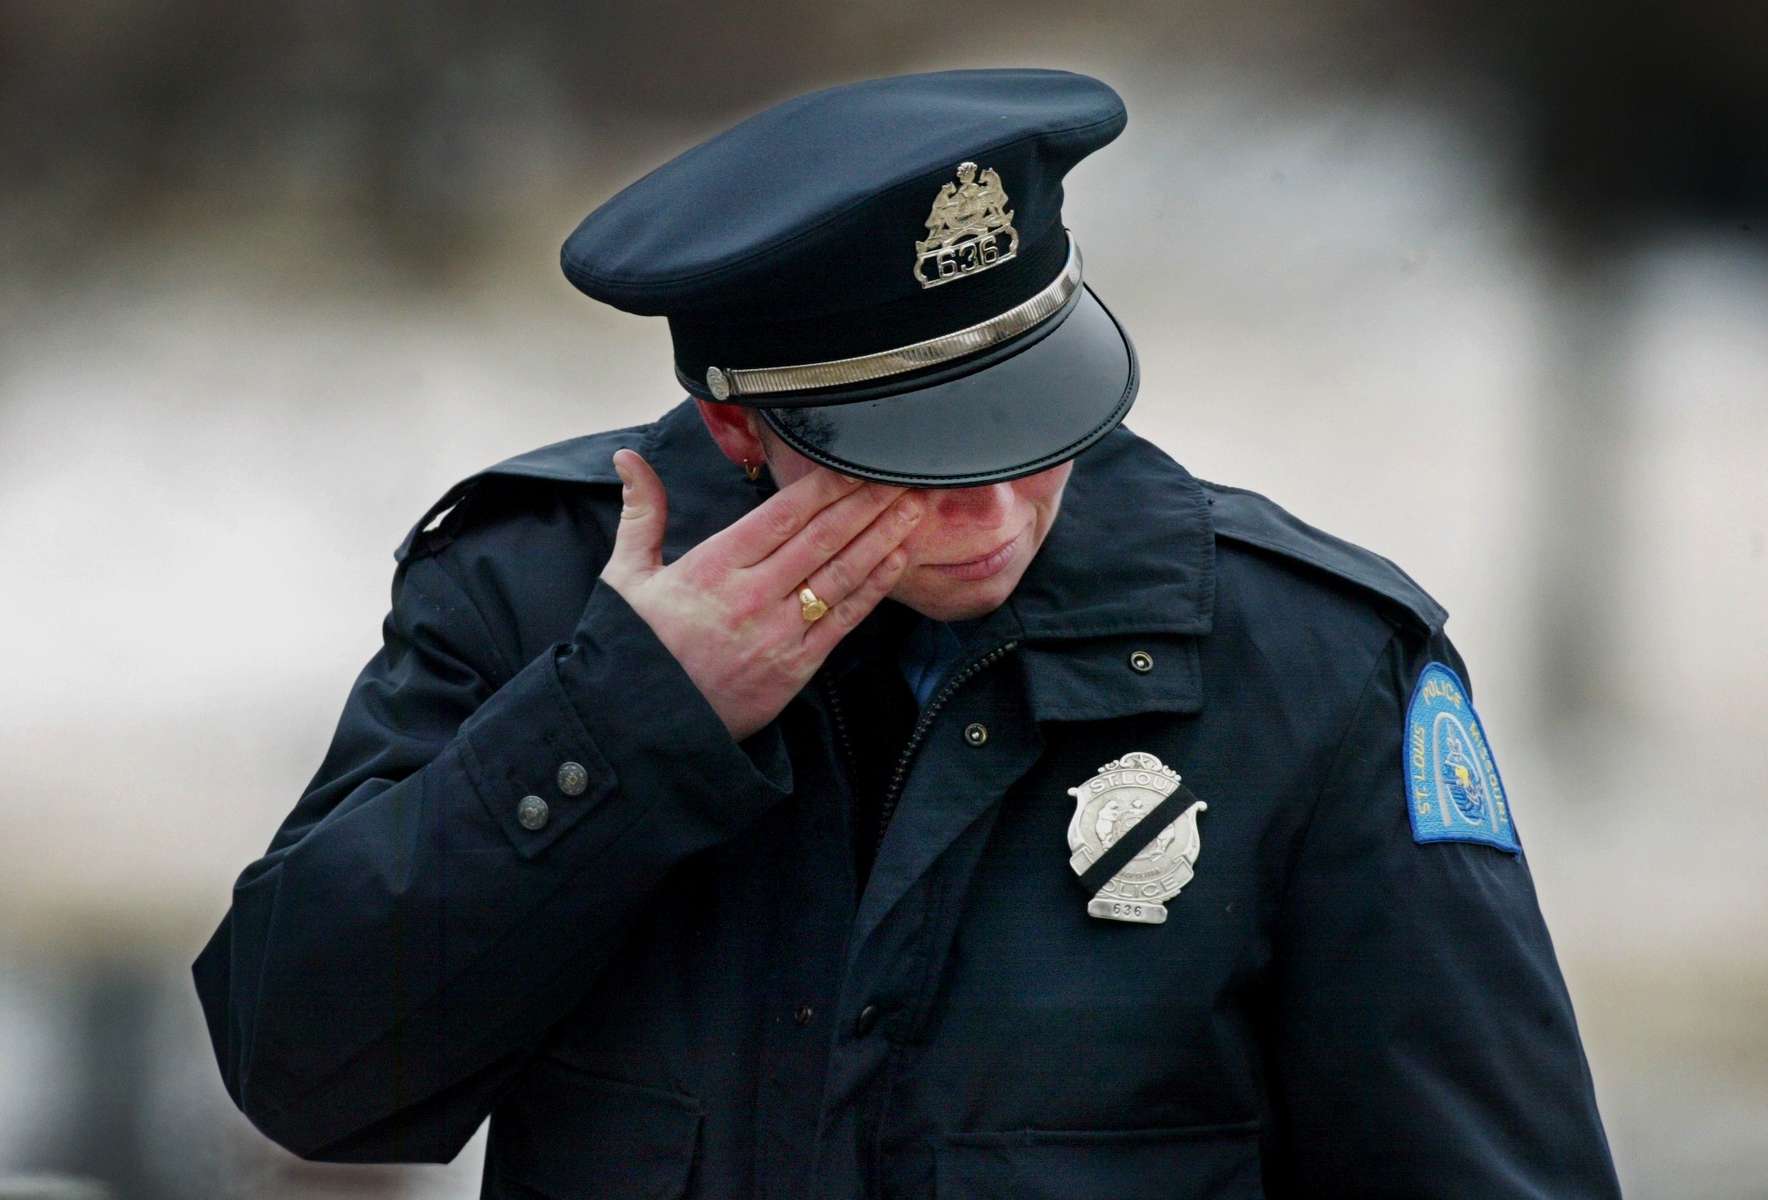 Wednesday February 4, 2004--St. Louis Police officer XXXXXX Fischer wipes tears from her eyes after fellow officer Nicholas Sloan was laid to rest at Calvary Cemetery on Wednesday.Photo By David Carson/PD  (We are working on Getting officer Fischer's first name at this time)